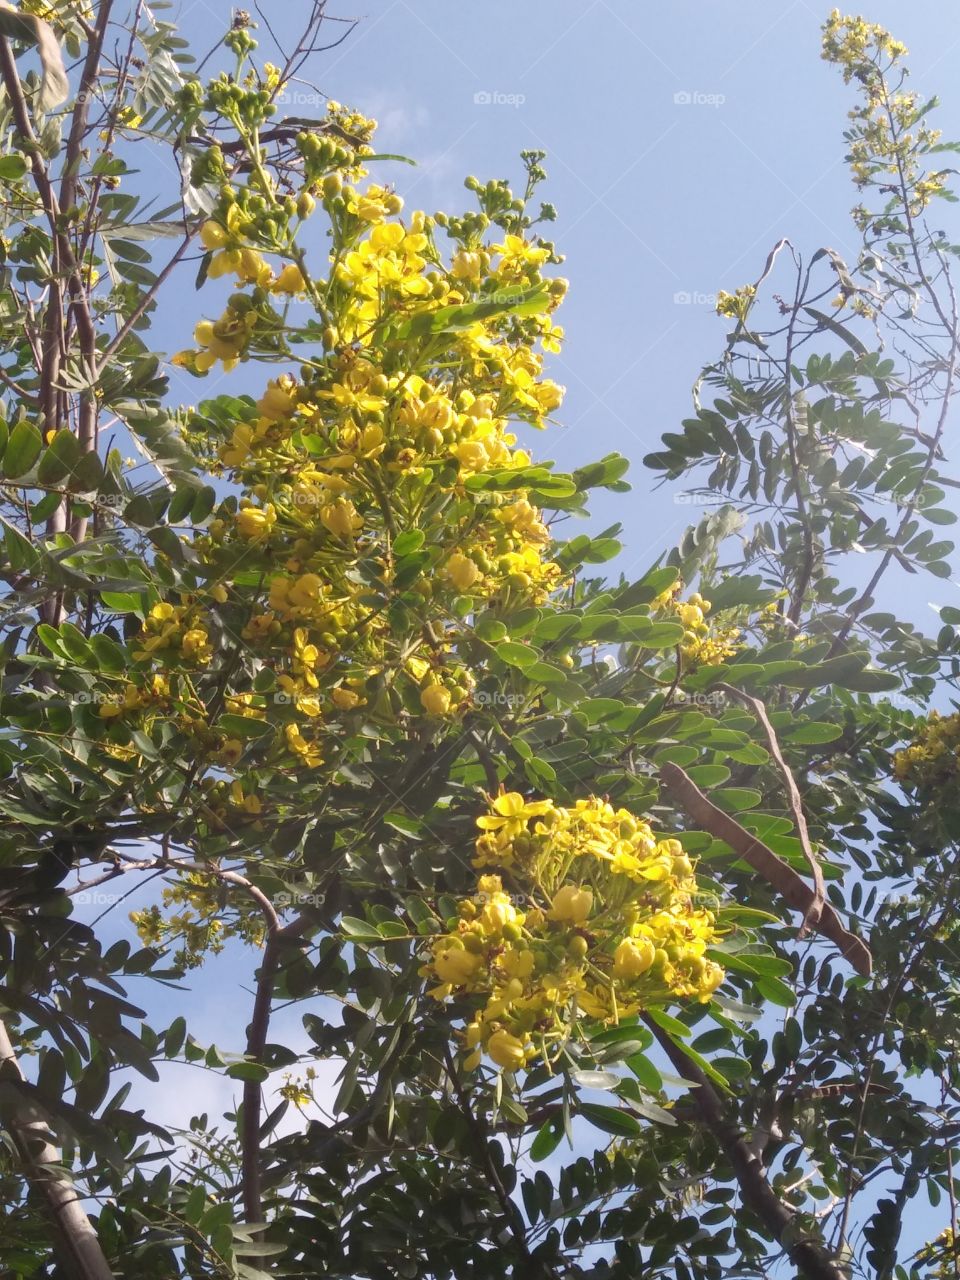 the most beautiful yellow colour flowers in my farm